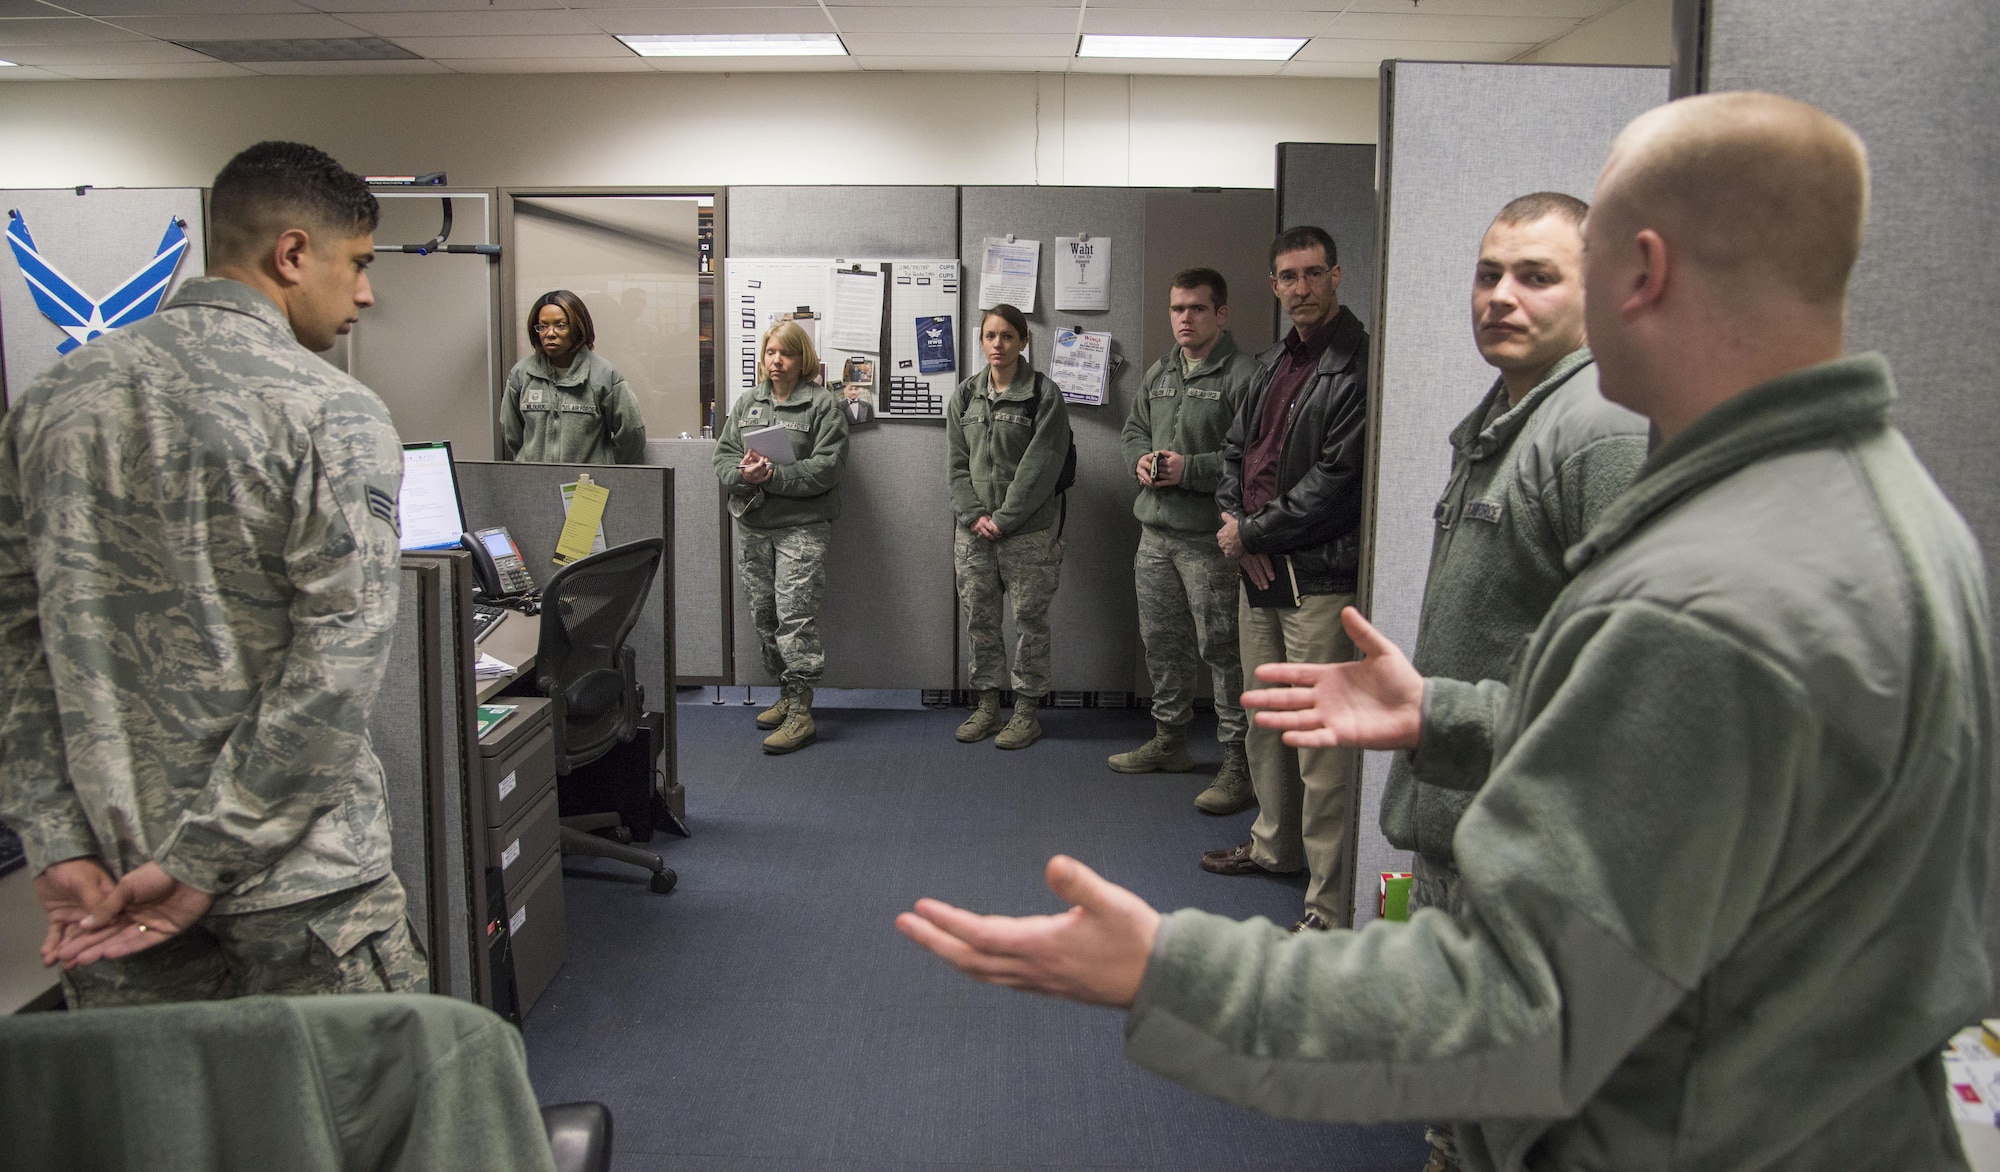 Members of the Cyberworx team were given an abundance of information during their visit to Scott Air Force Base Feb. 3. The team met with the 375th Communications Group, the 688th Cyber Operations group and the 618th Air operations Center. U.S. Air Force photo by Airman Chad Gorecki